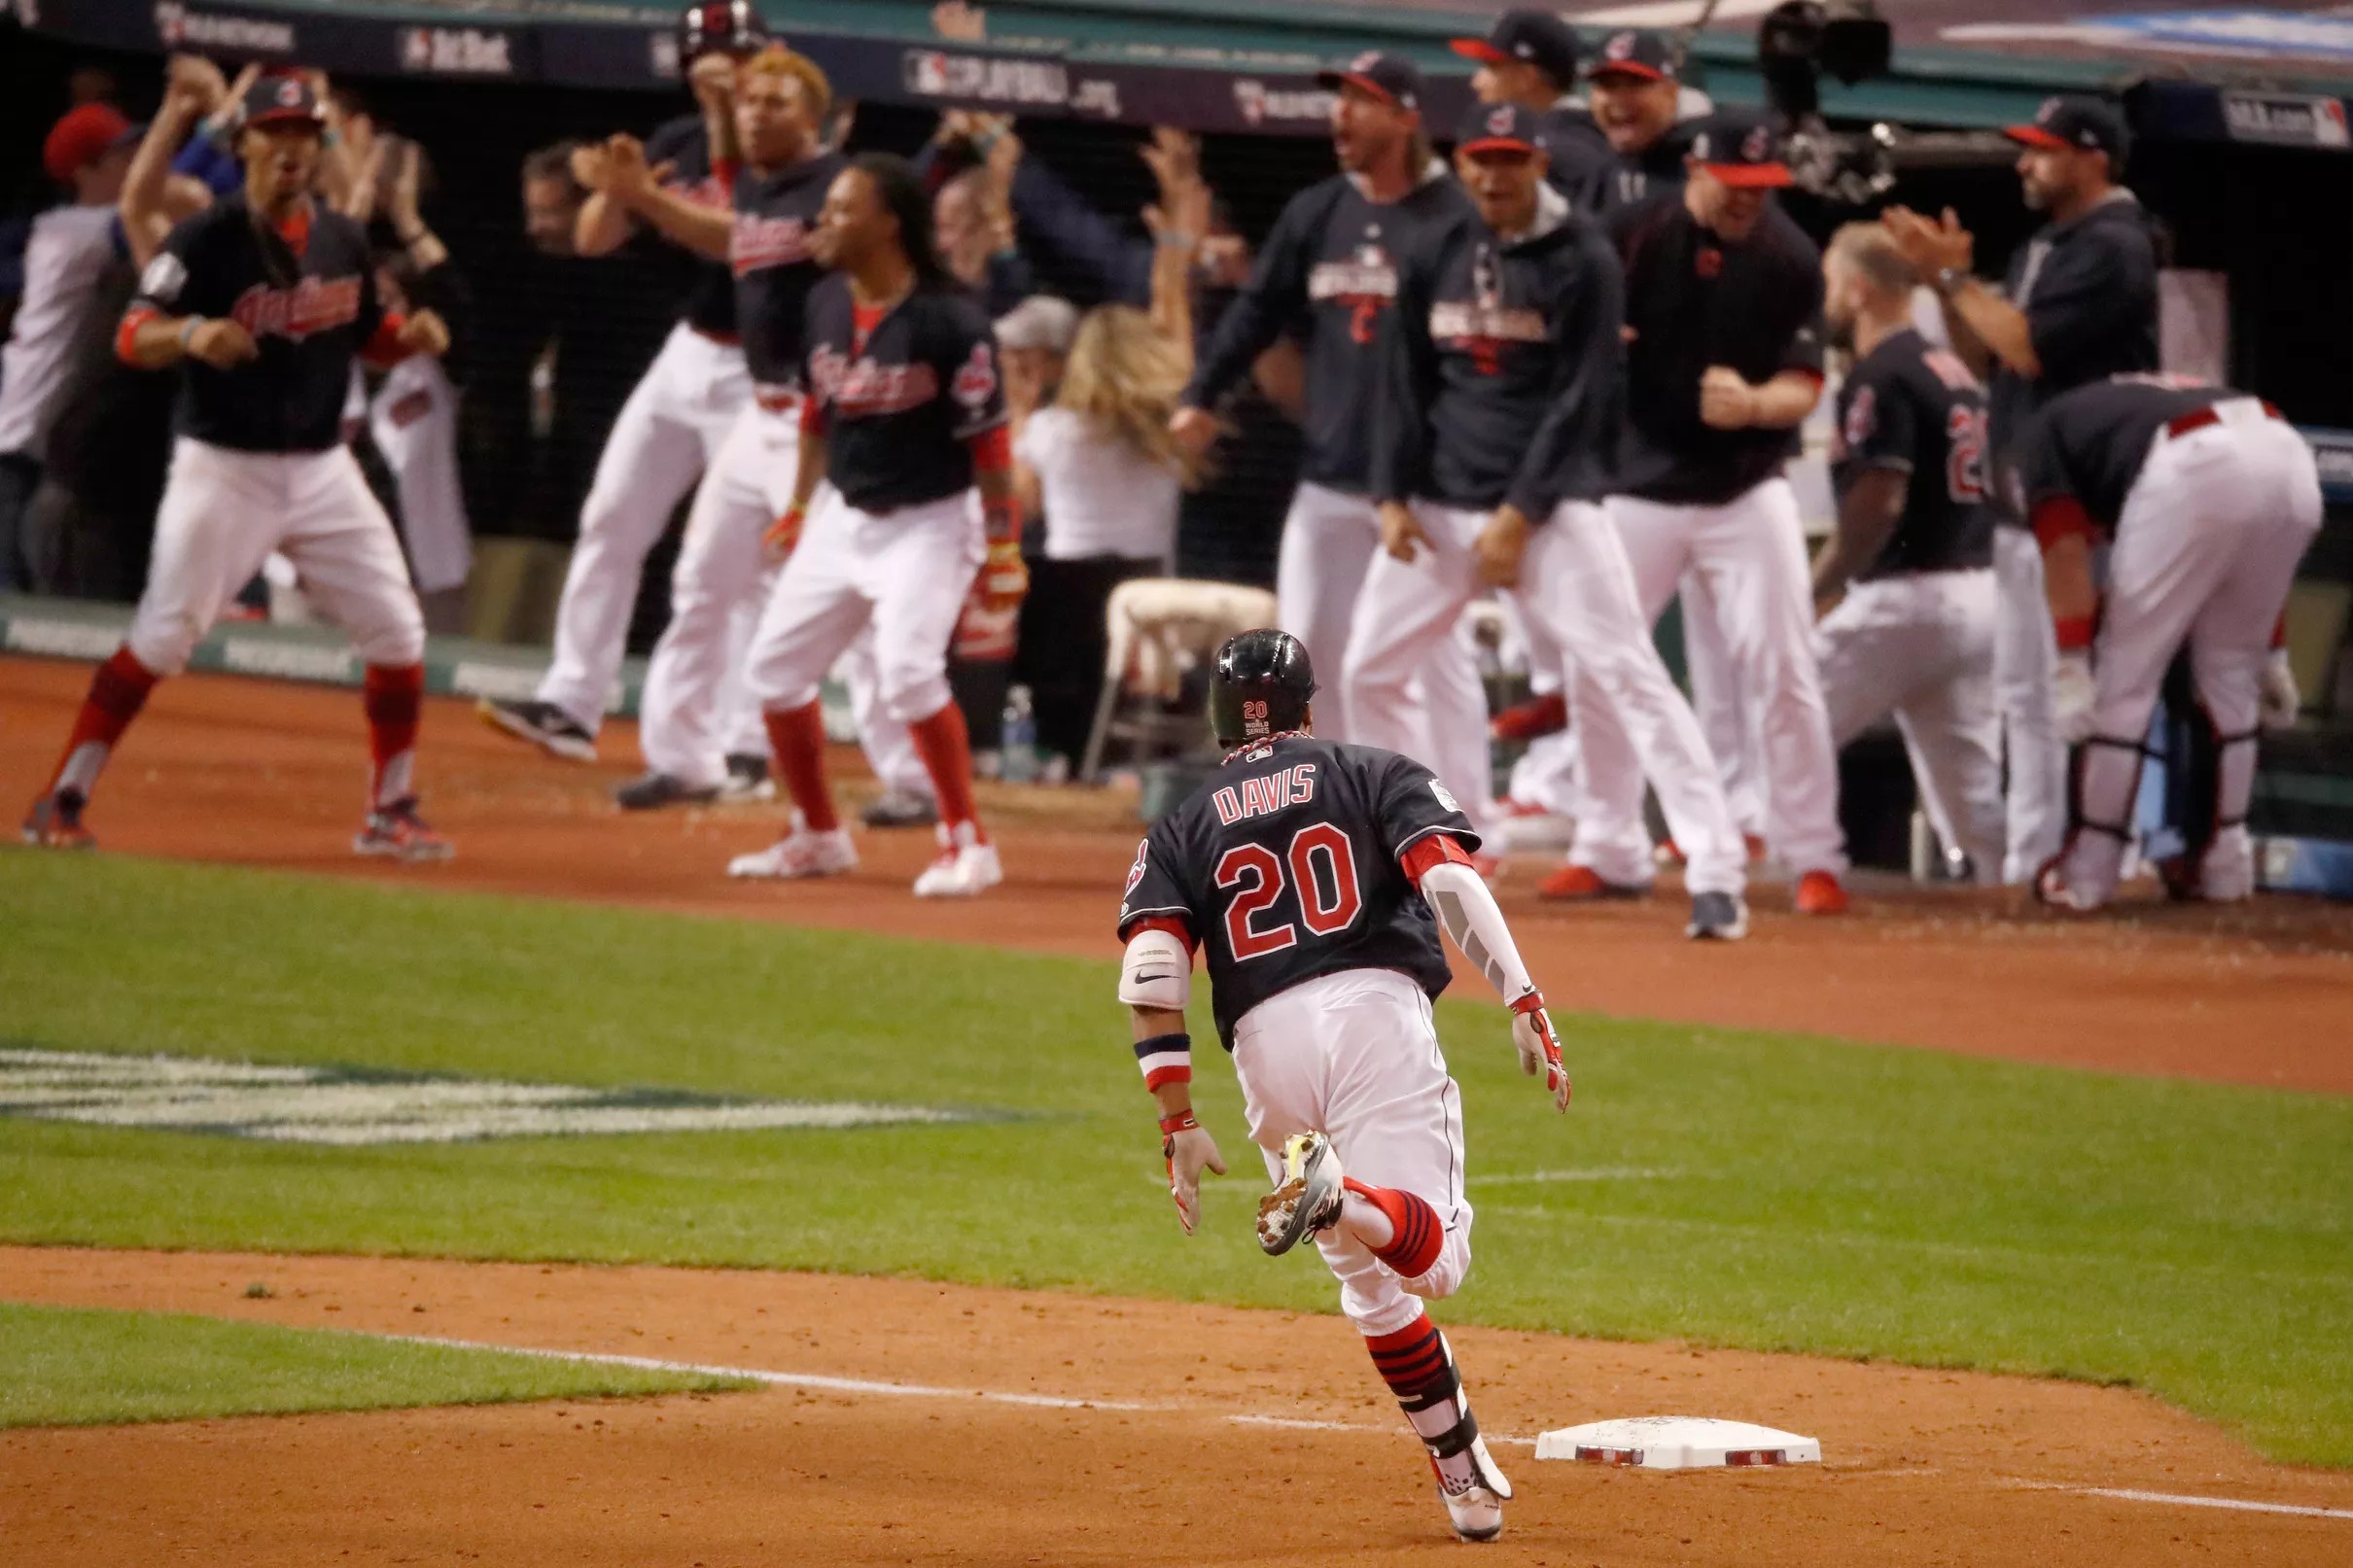 is the 2016 world series game 7 going to be rebroadcast